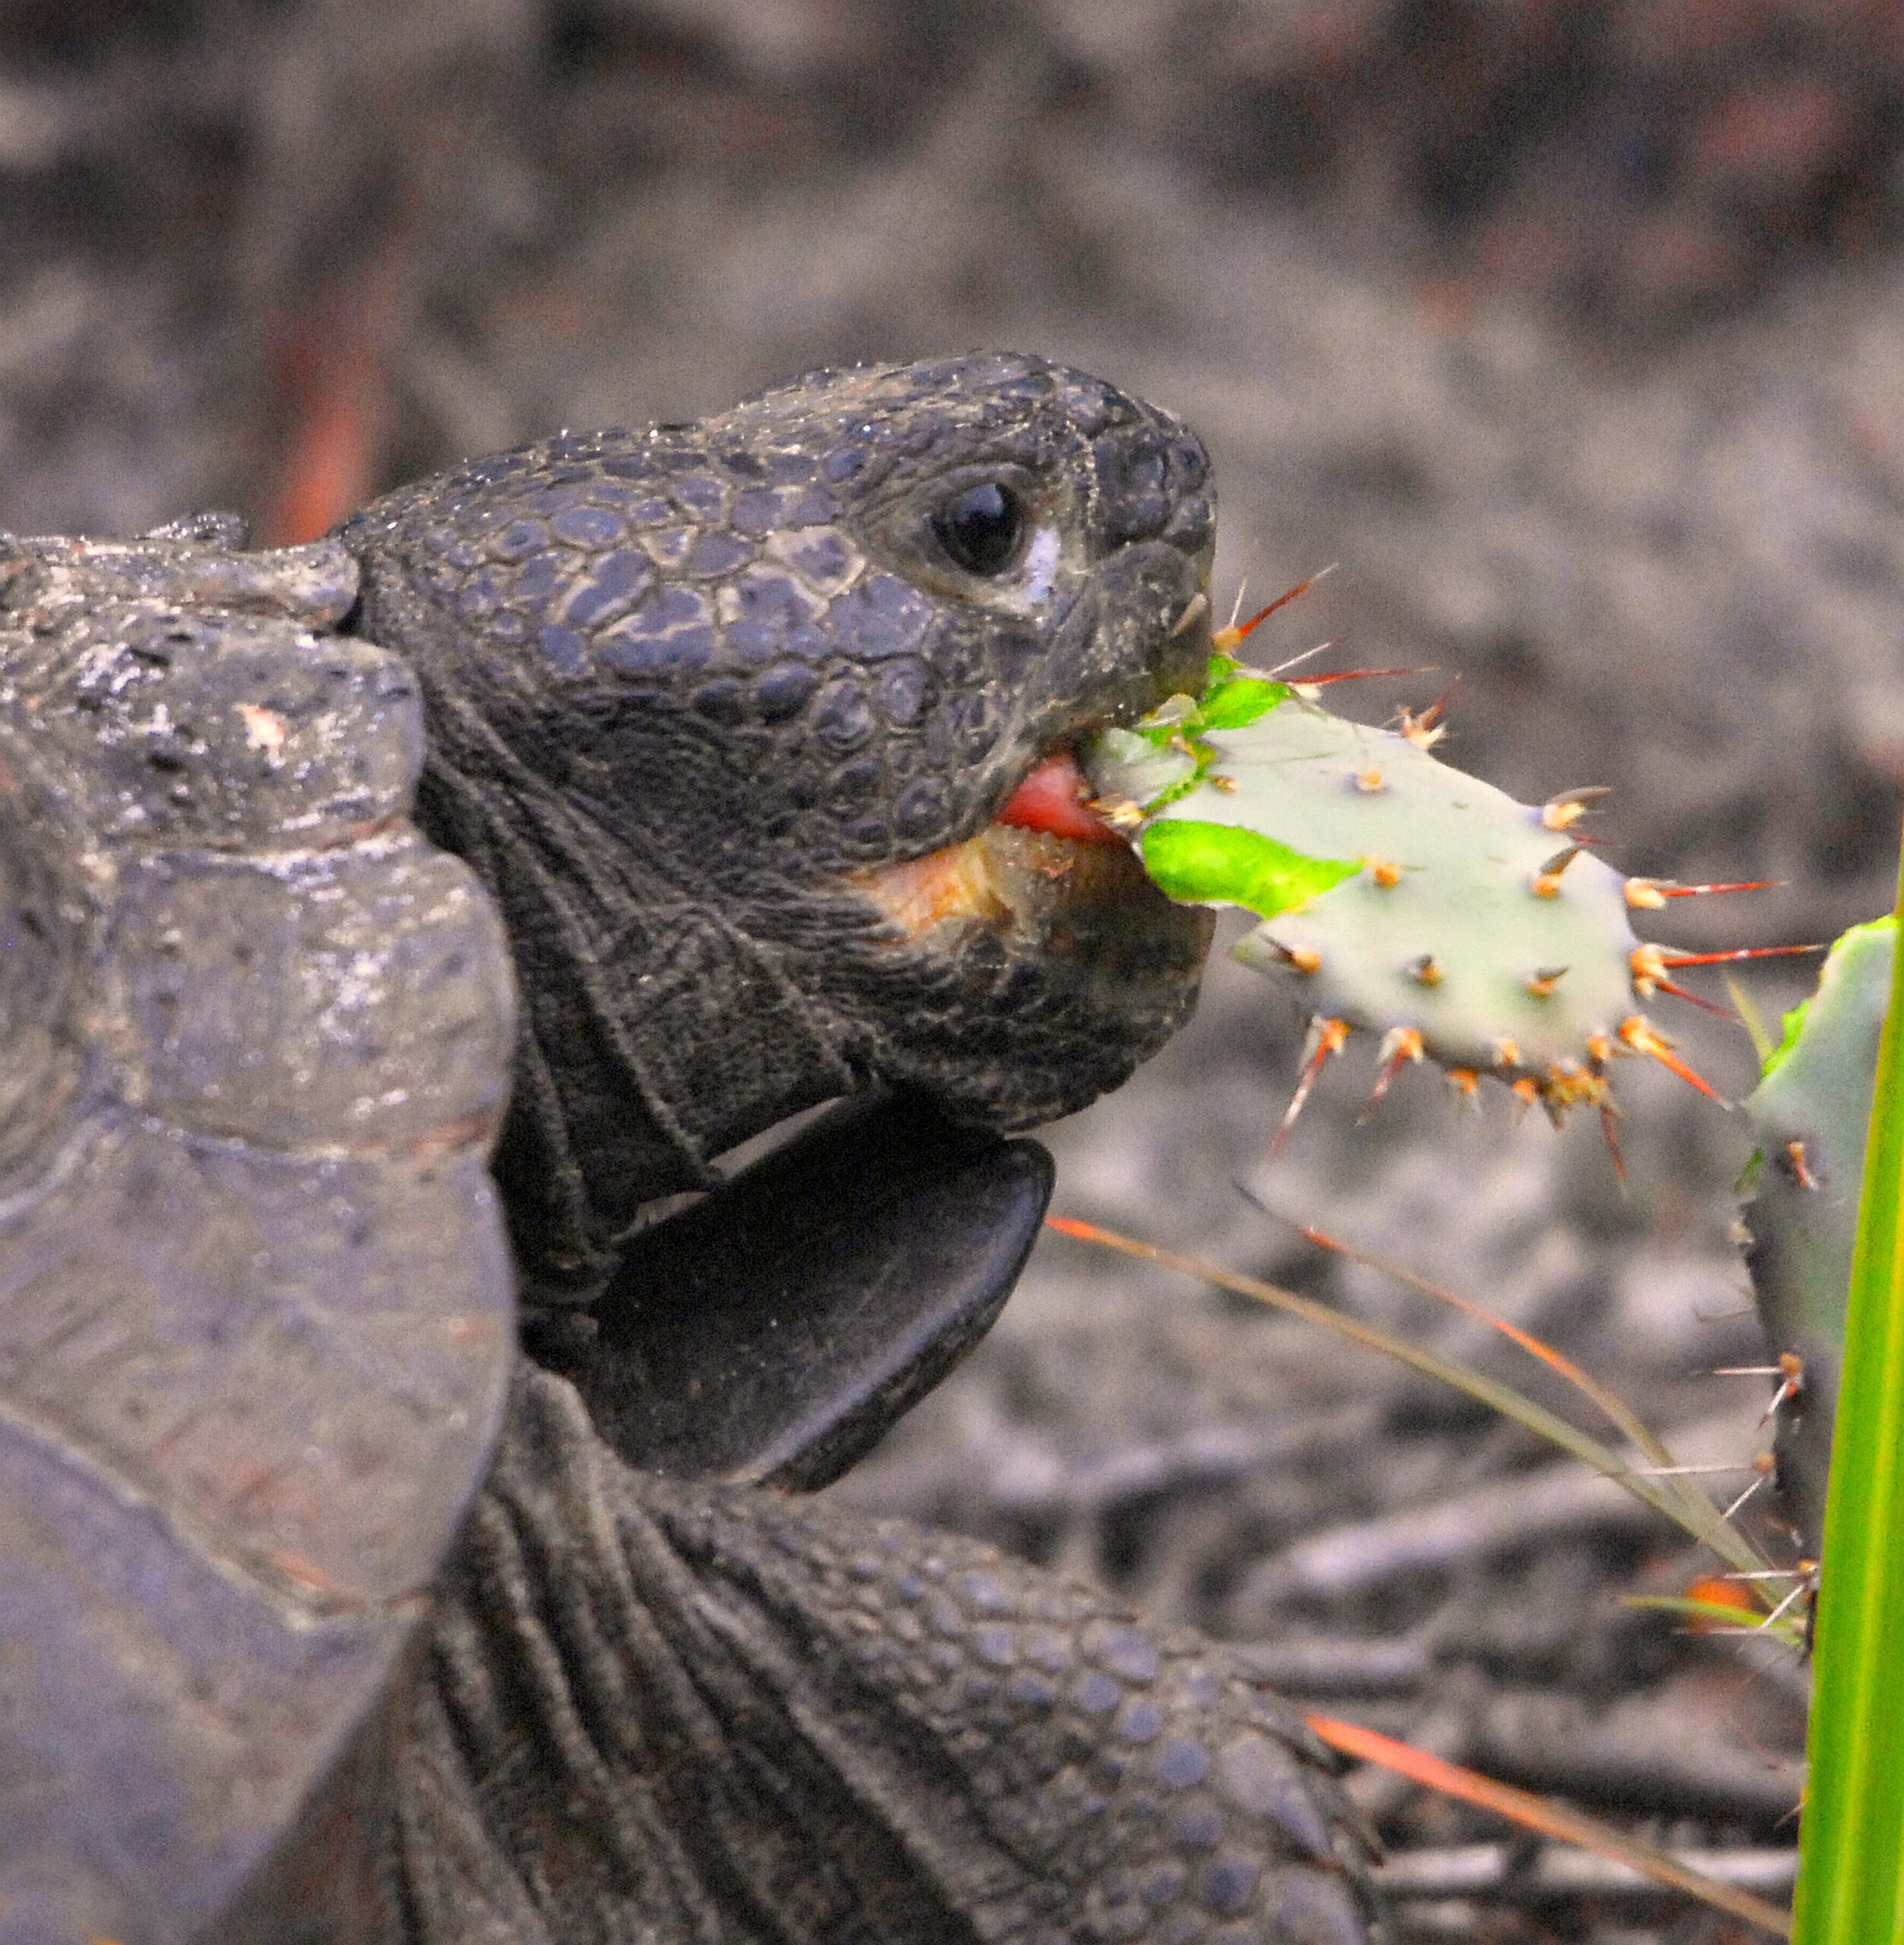 Can Tortoises Eat Spring Mix